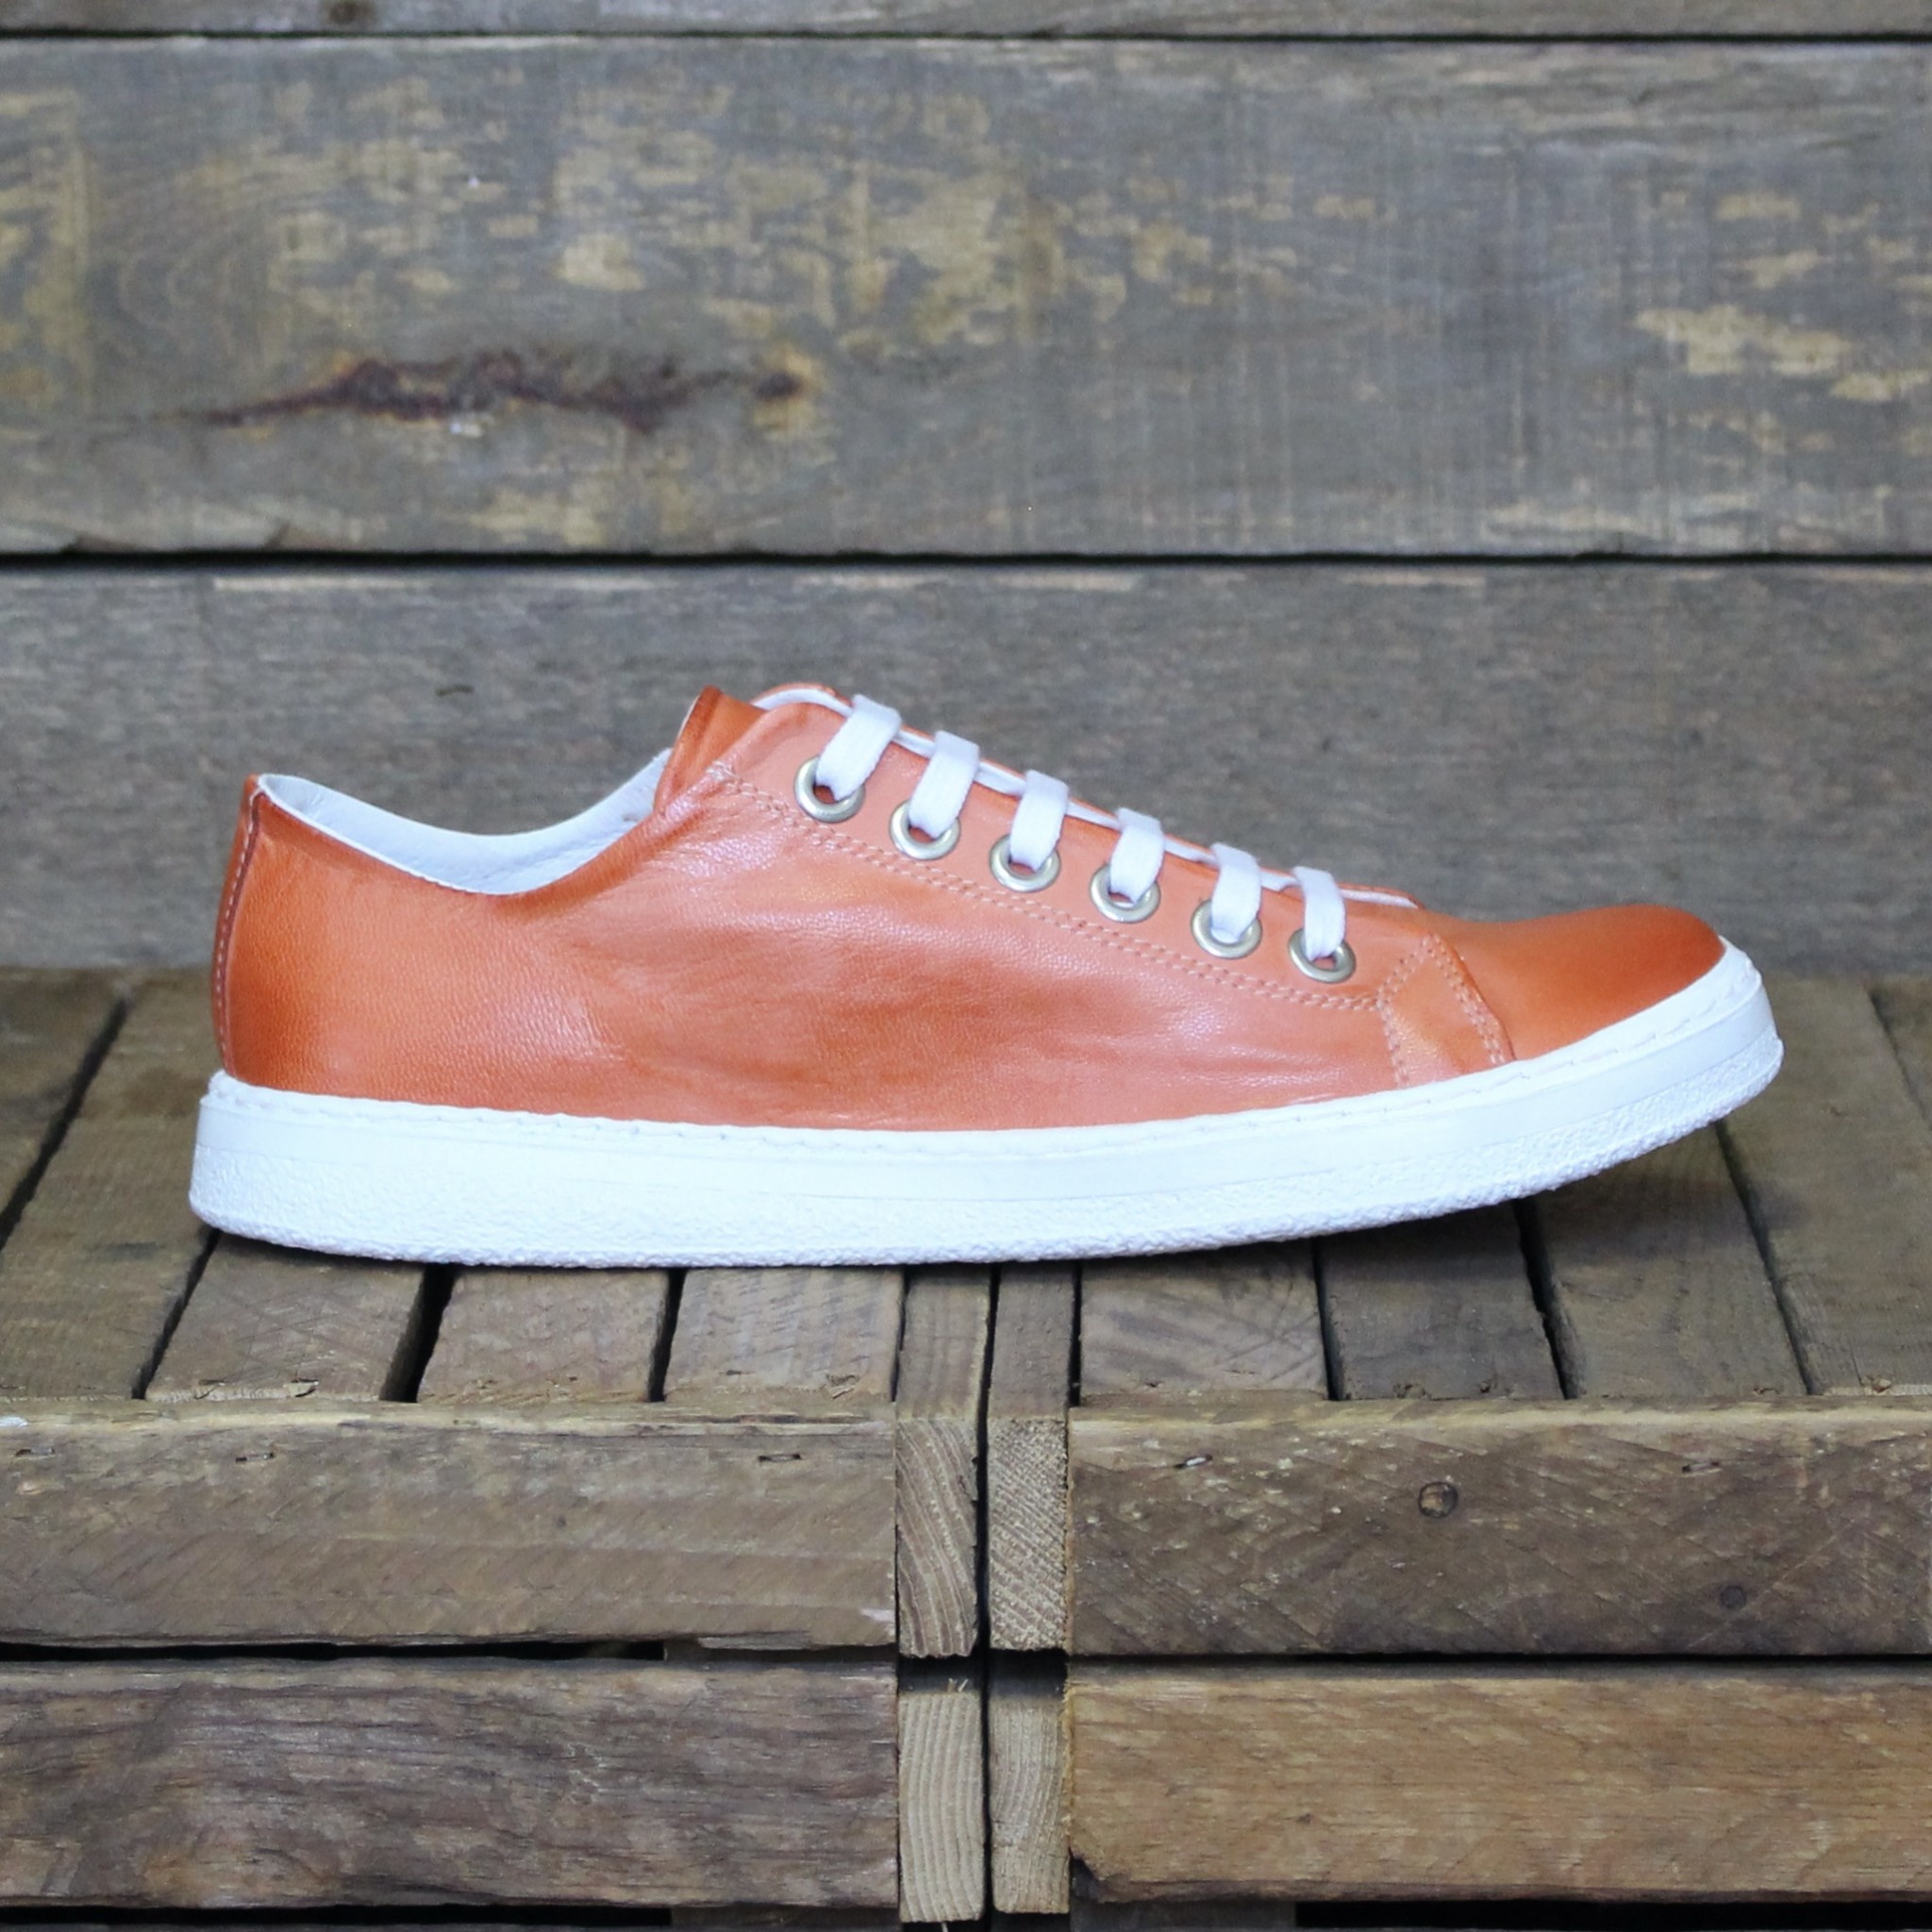 Chacal Chacal - 5471 Ceraline Leather - Orange